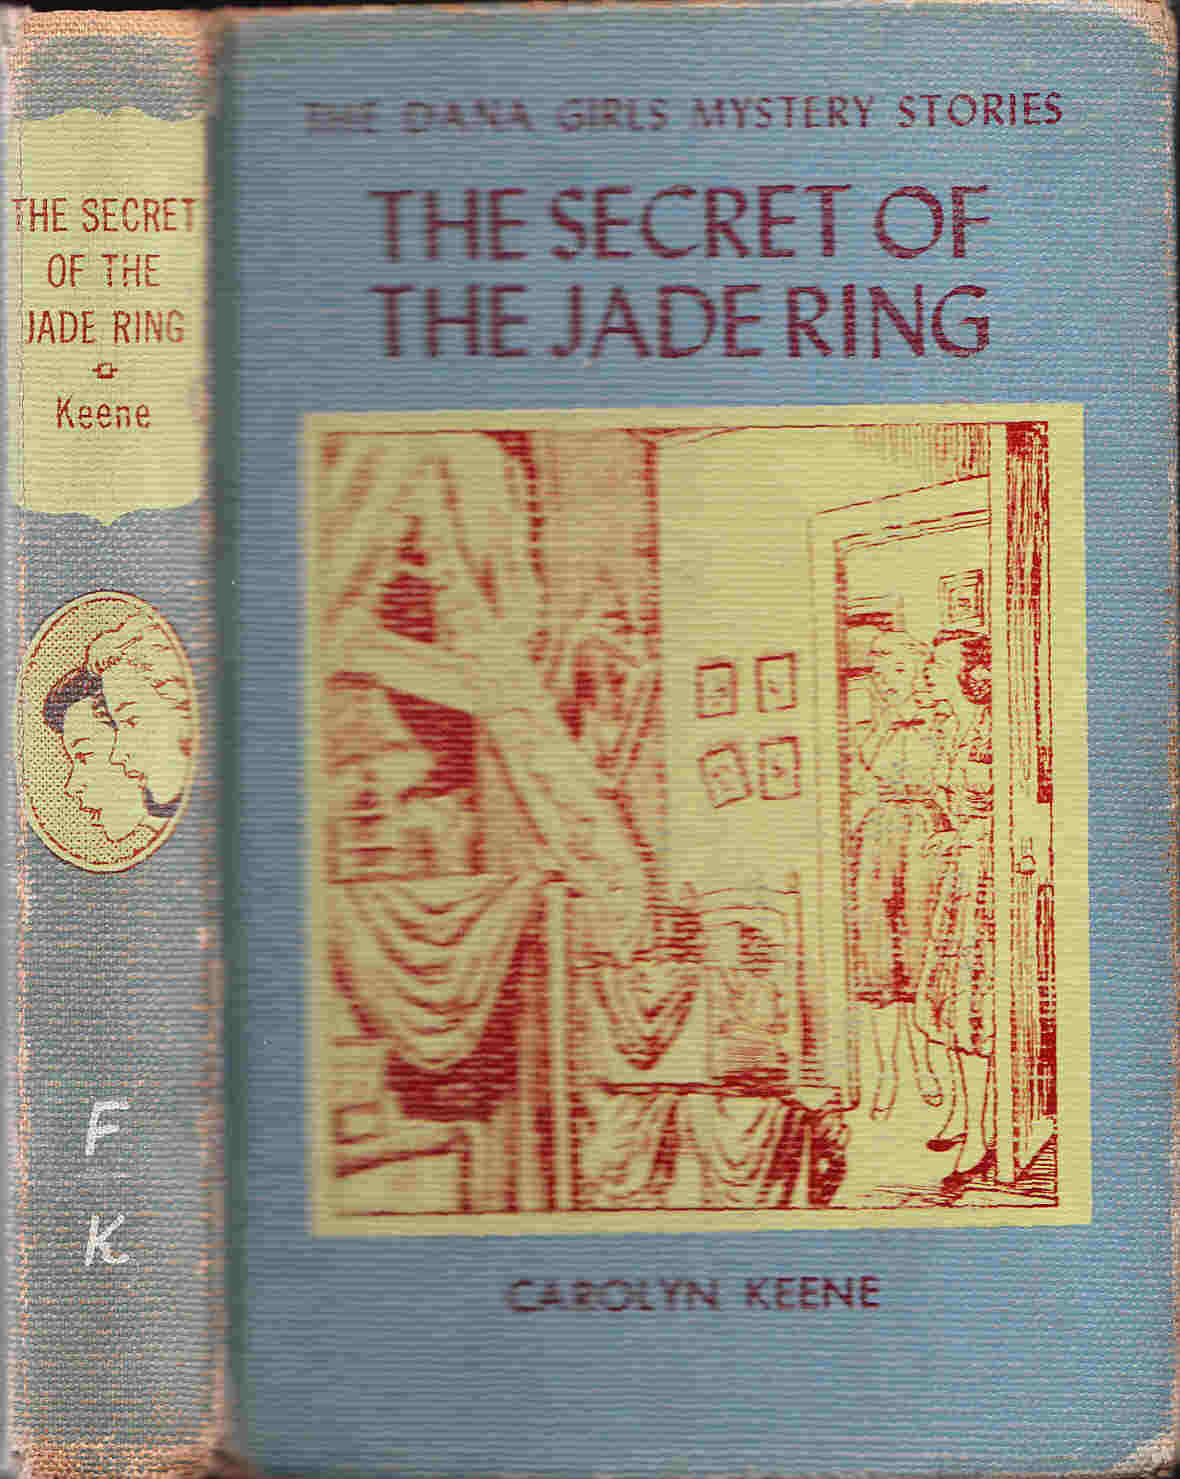 15. The Secret of the Jade Ring